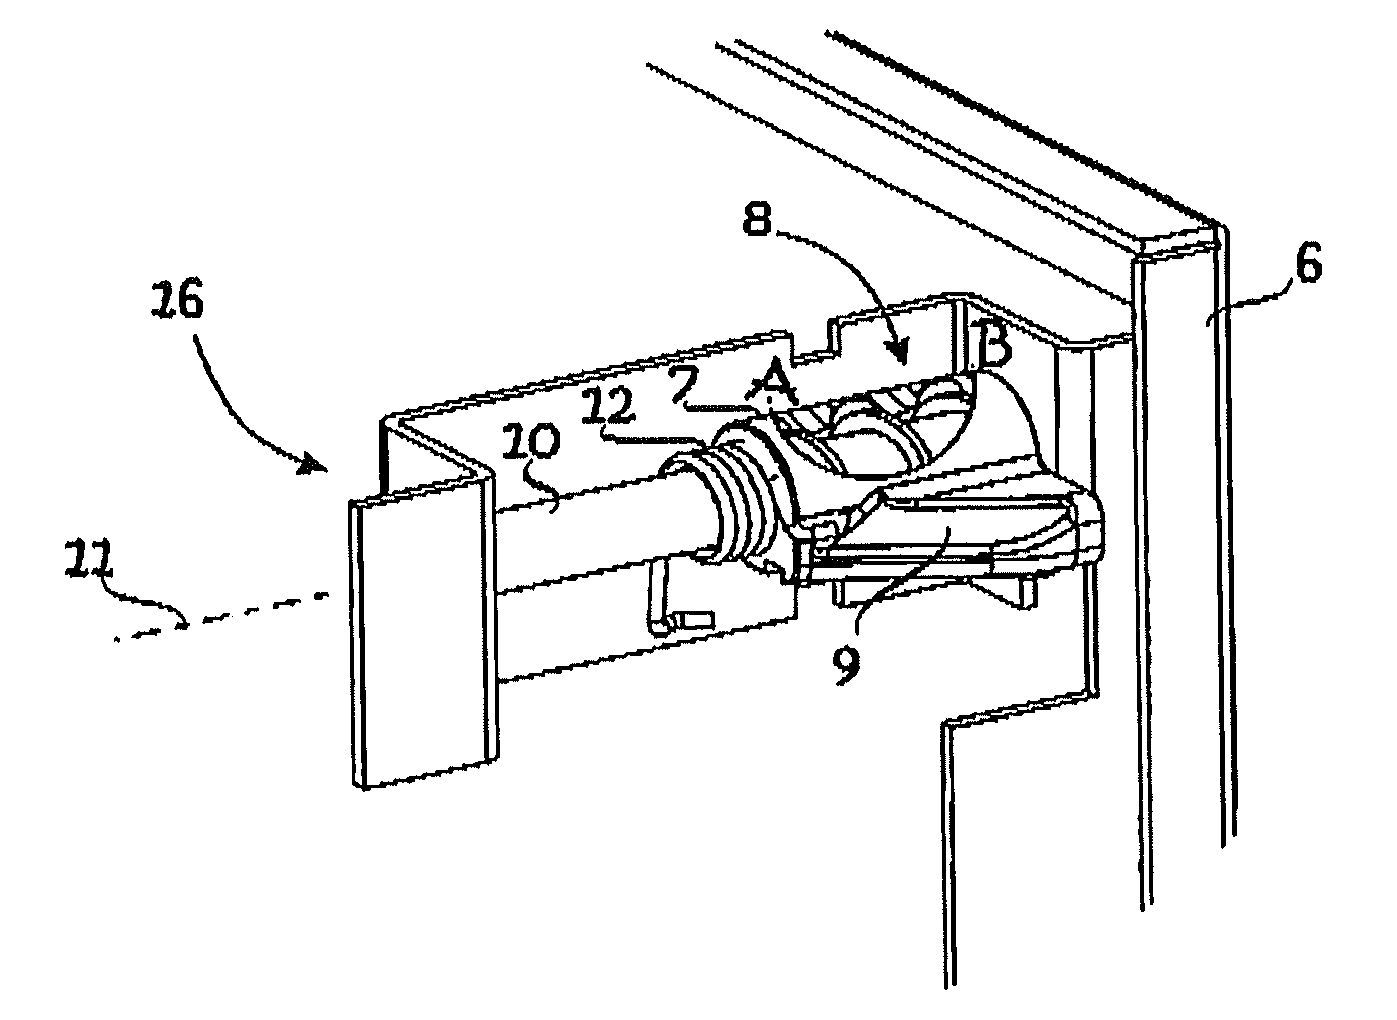 Mechanism for fastening casing into wall opening